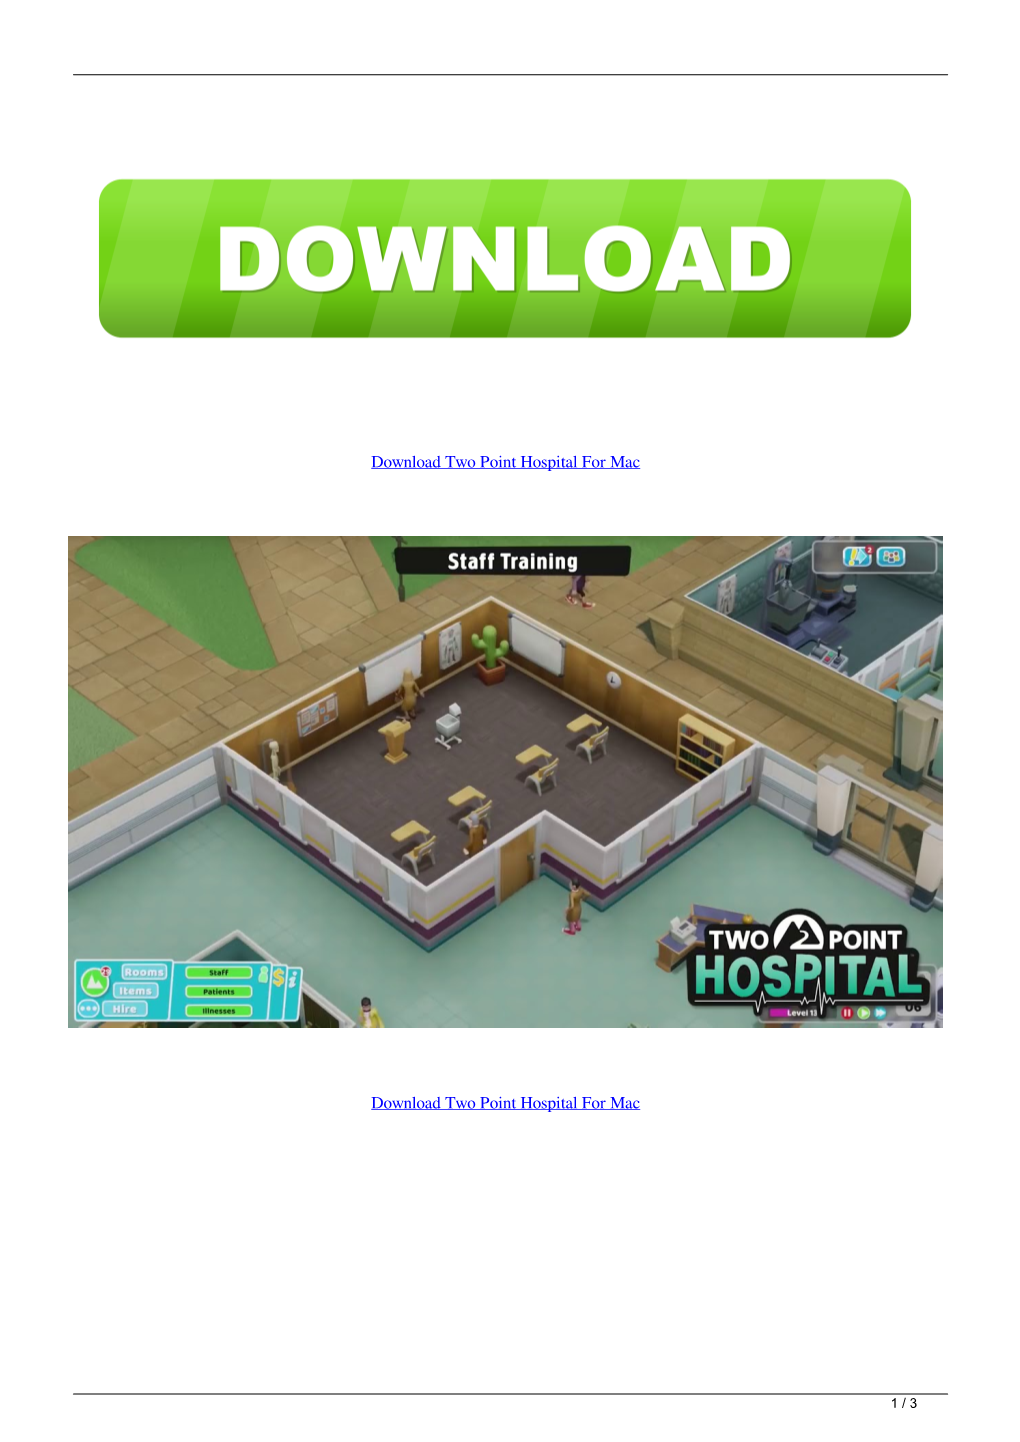 Download Two Point Hospital for Mac